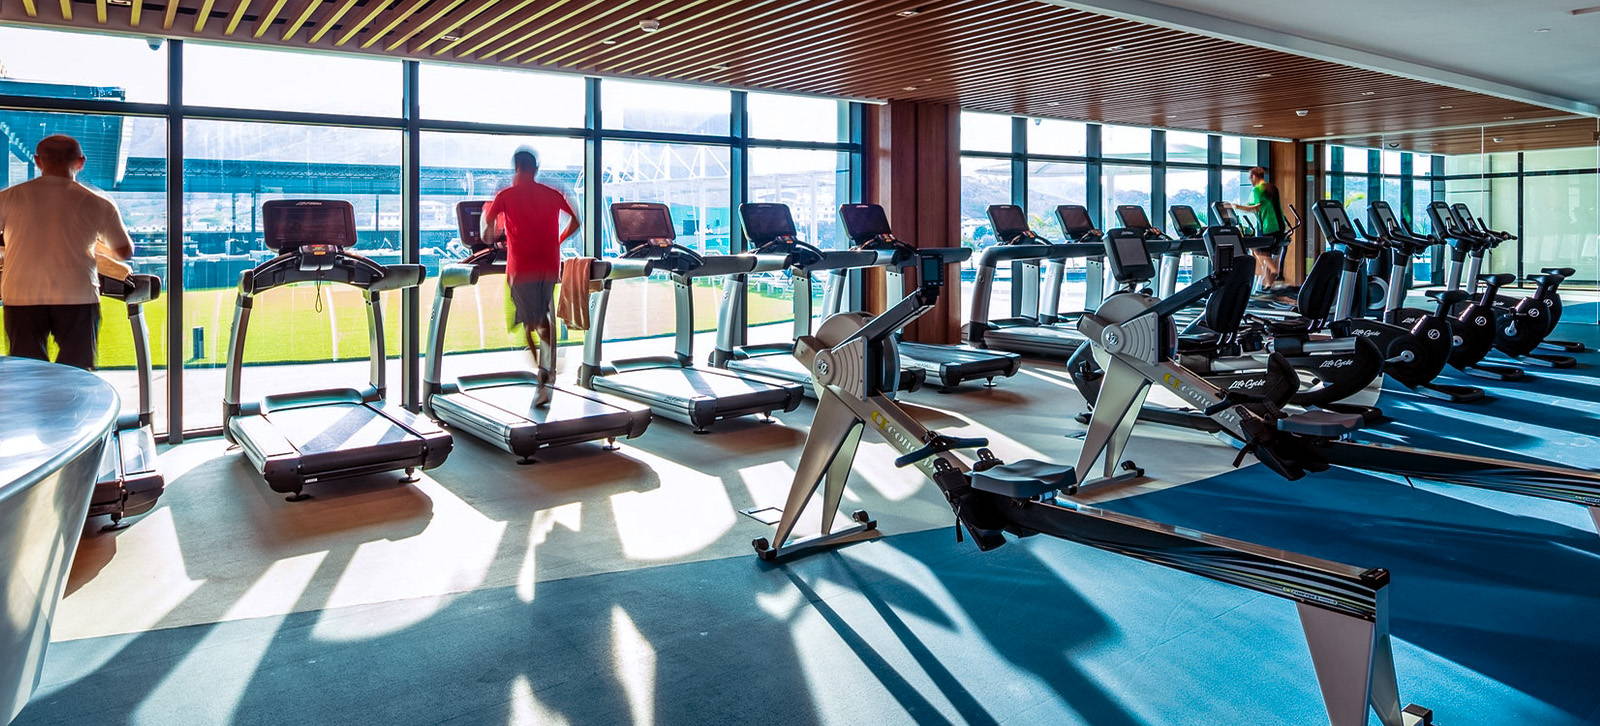 Hotel Gym Equipment Treadmills and Rowers